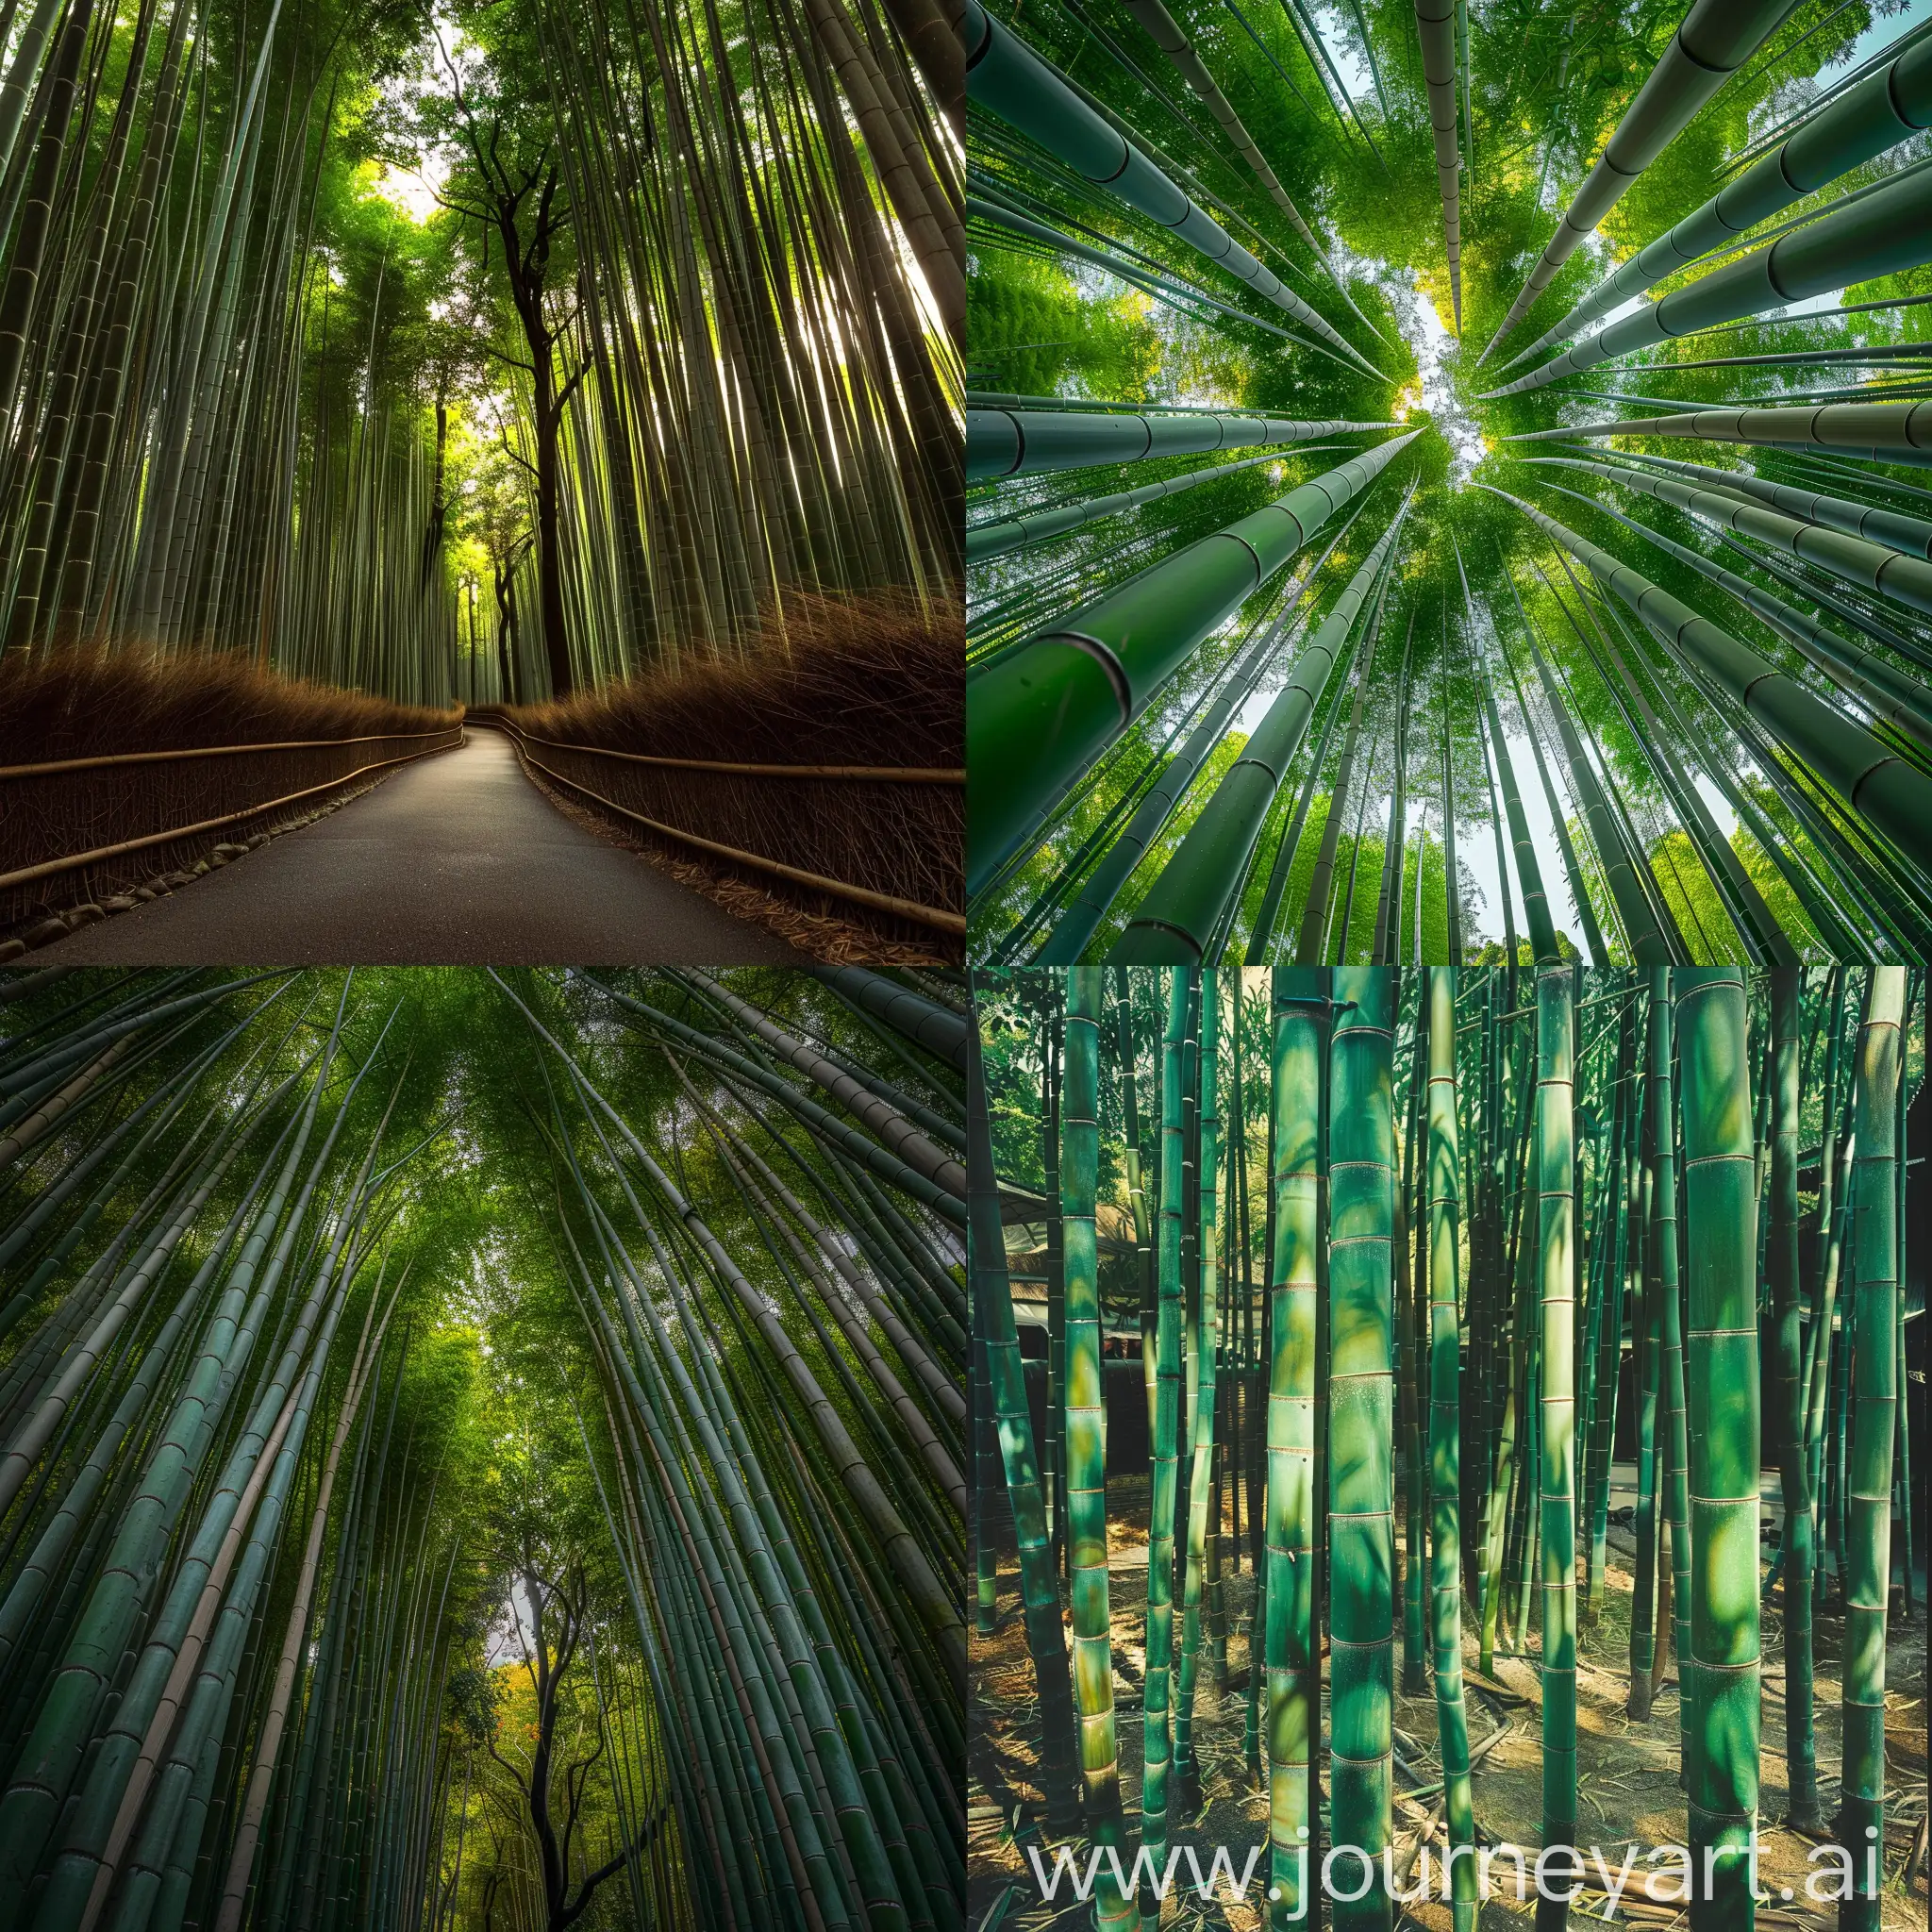 Tranquil-Bamboo-Forest-in-Temple-Serene-HighLevel-Photography-Perspective